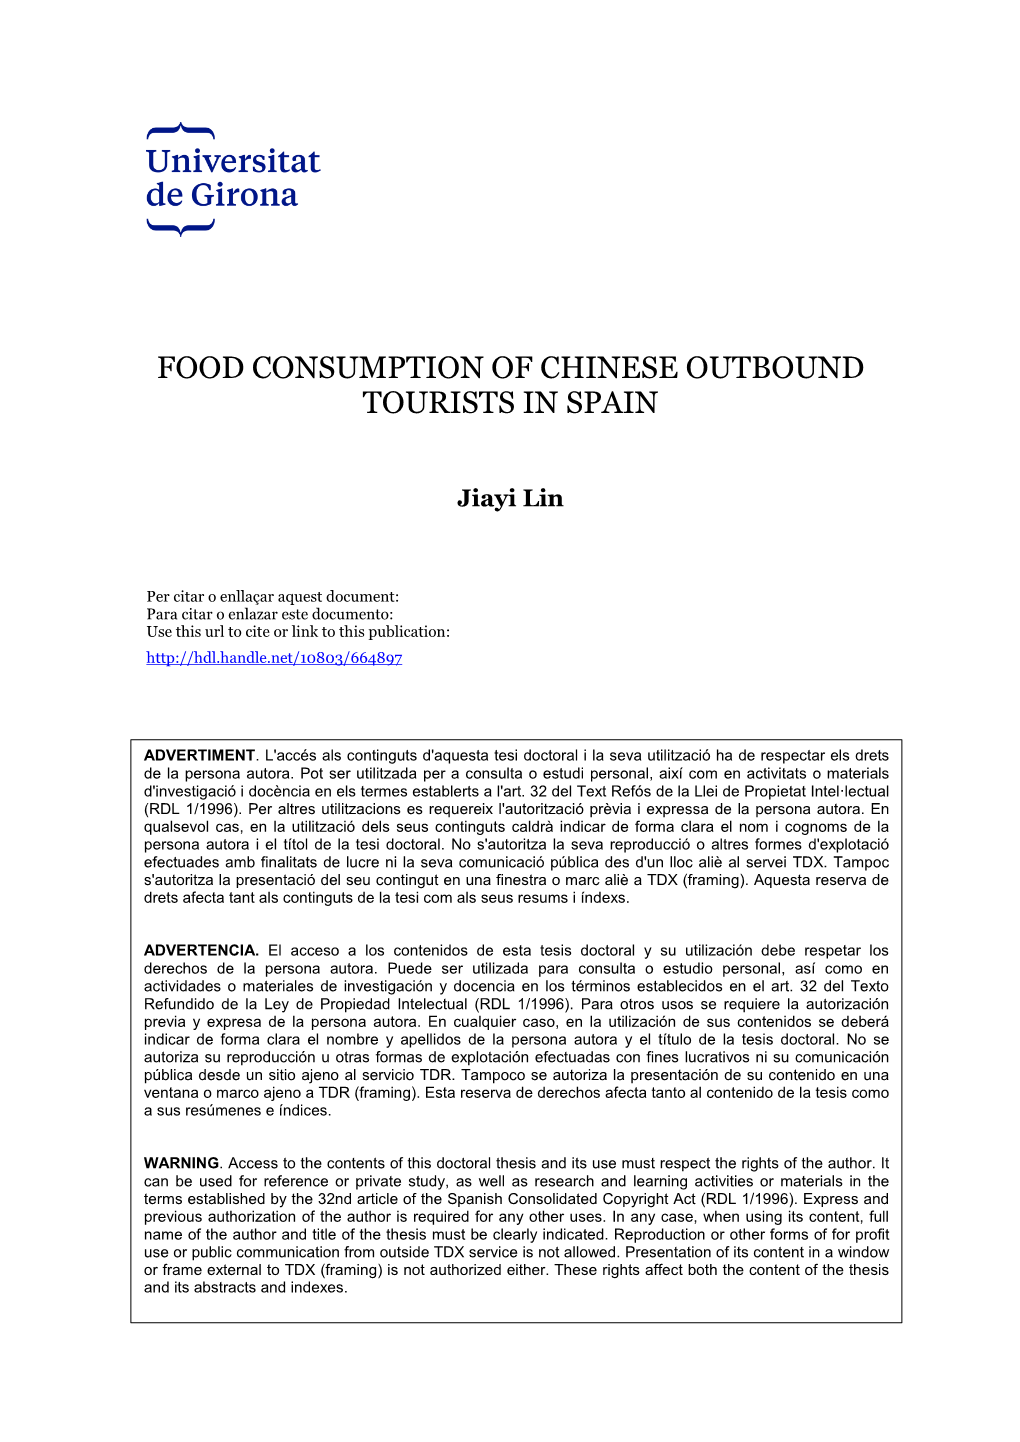 Food Consumption of Chinese Outbound Tourists in Spain